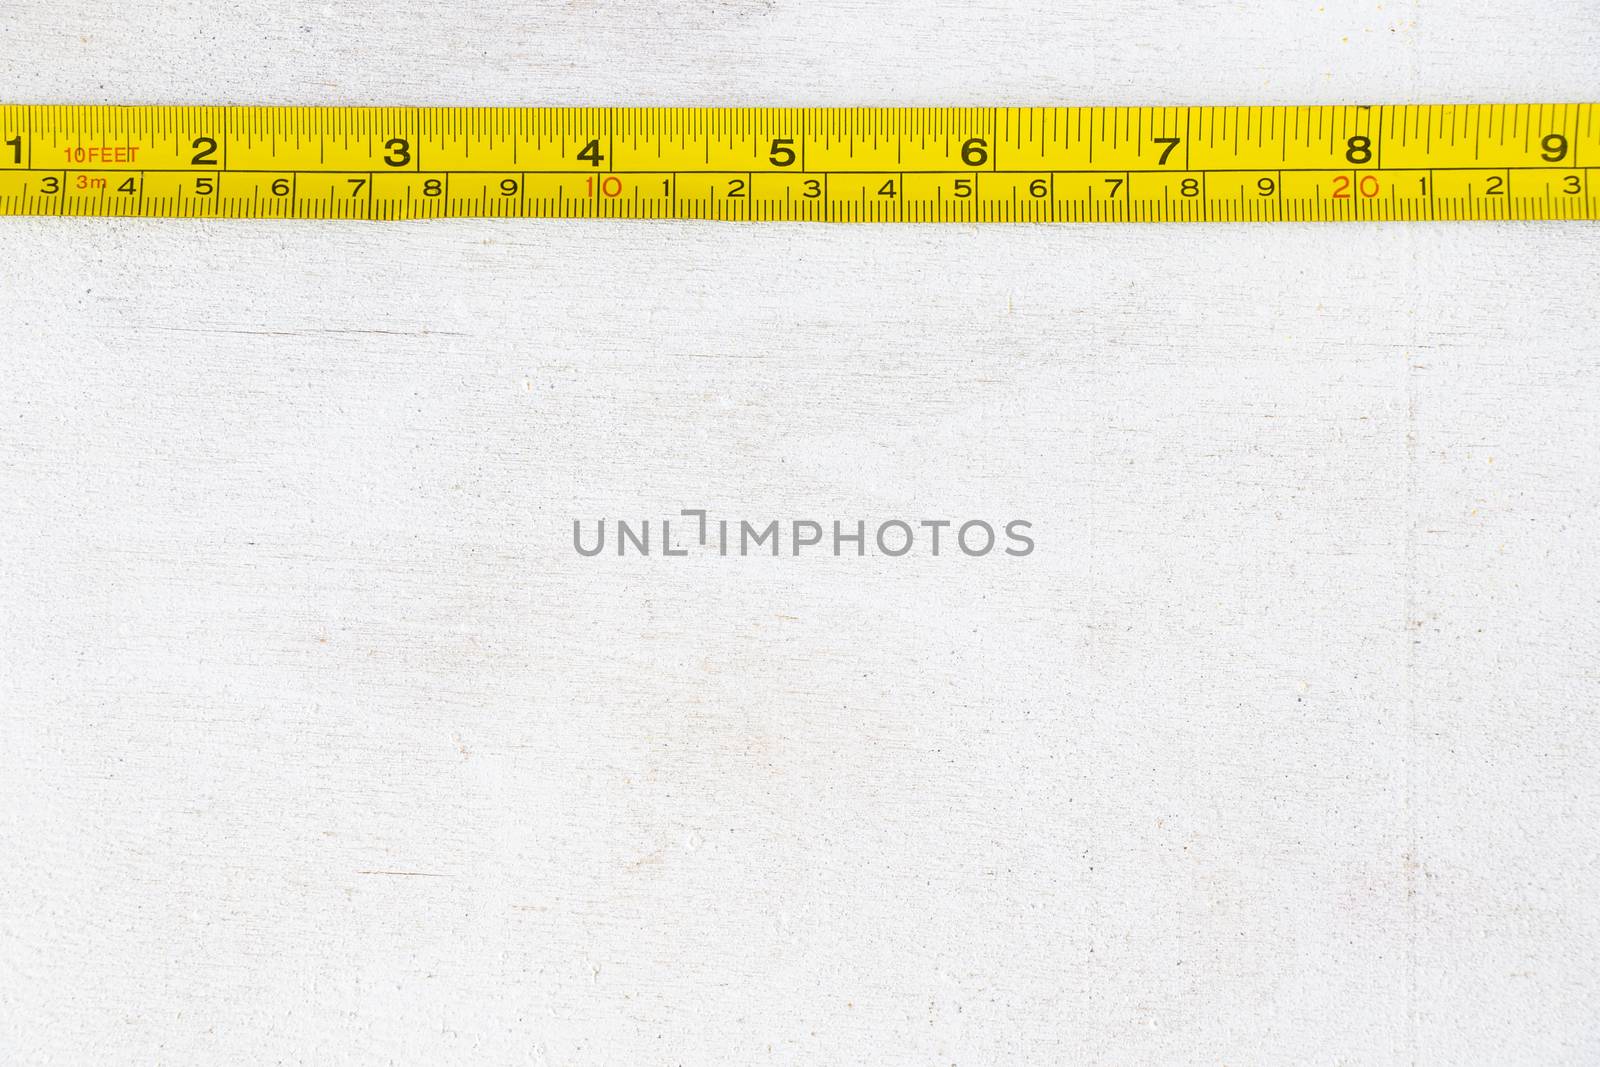 Metal ruler, centimeters and millimeters on the yellow ruler by Taidundua